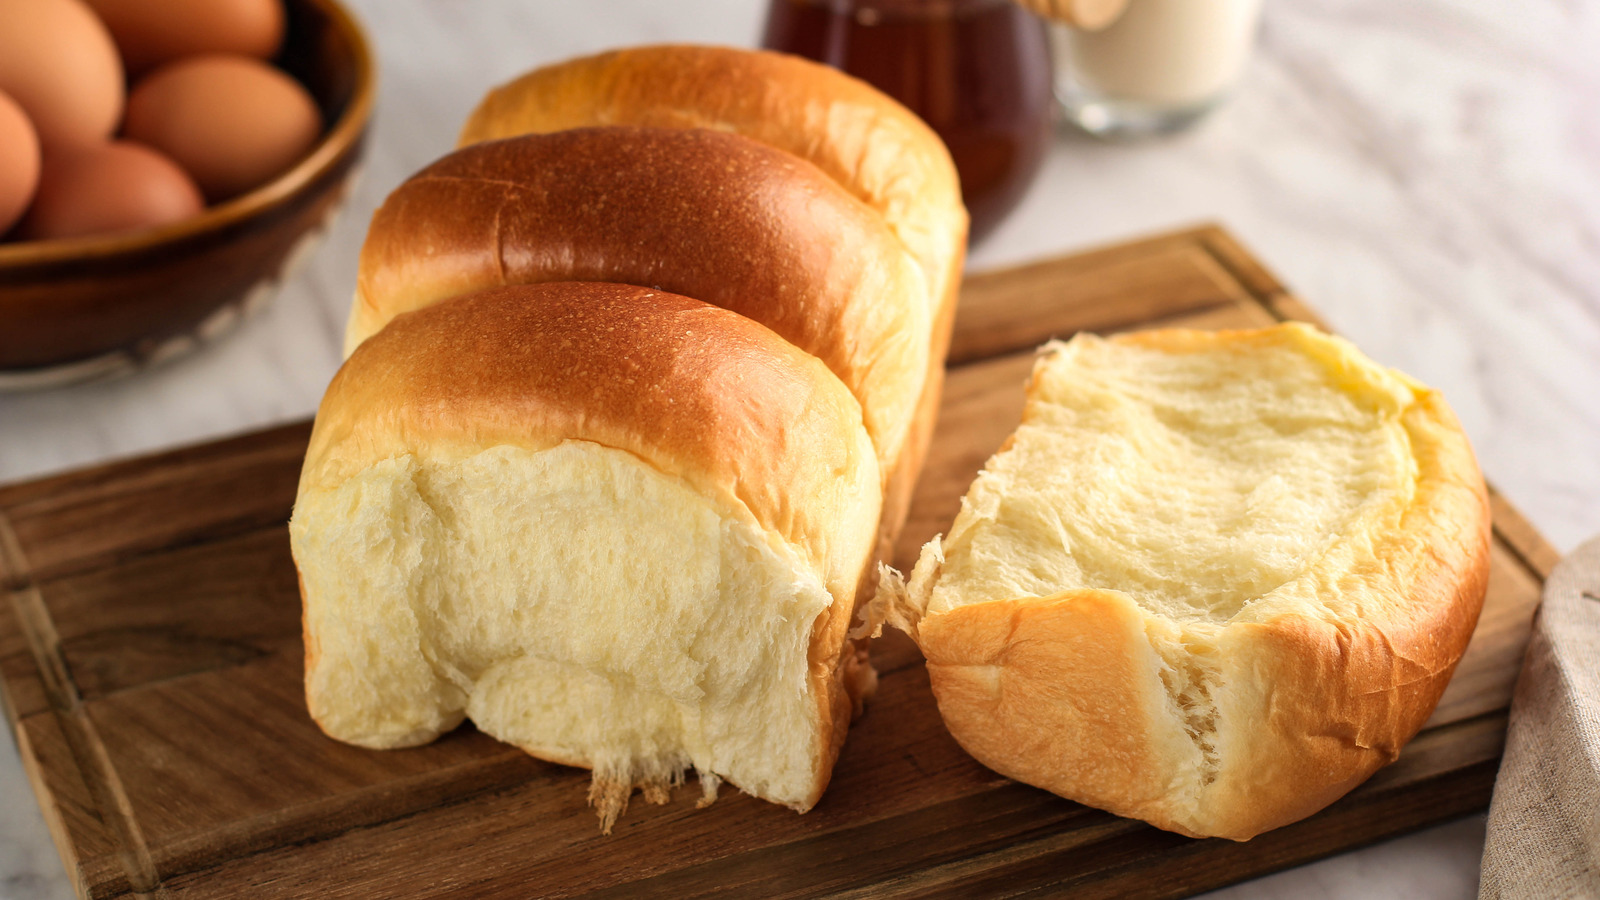 The Simple Trick For Keeping Your Loaf Of Bread Soft - Tasting Table